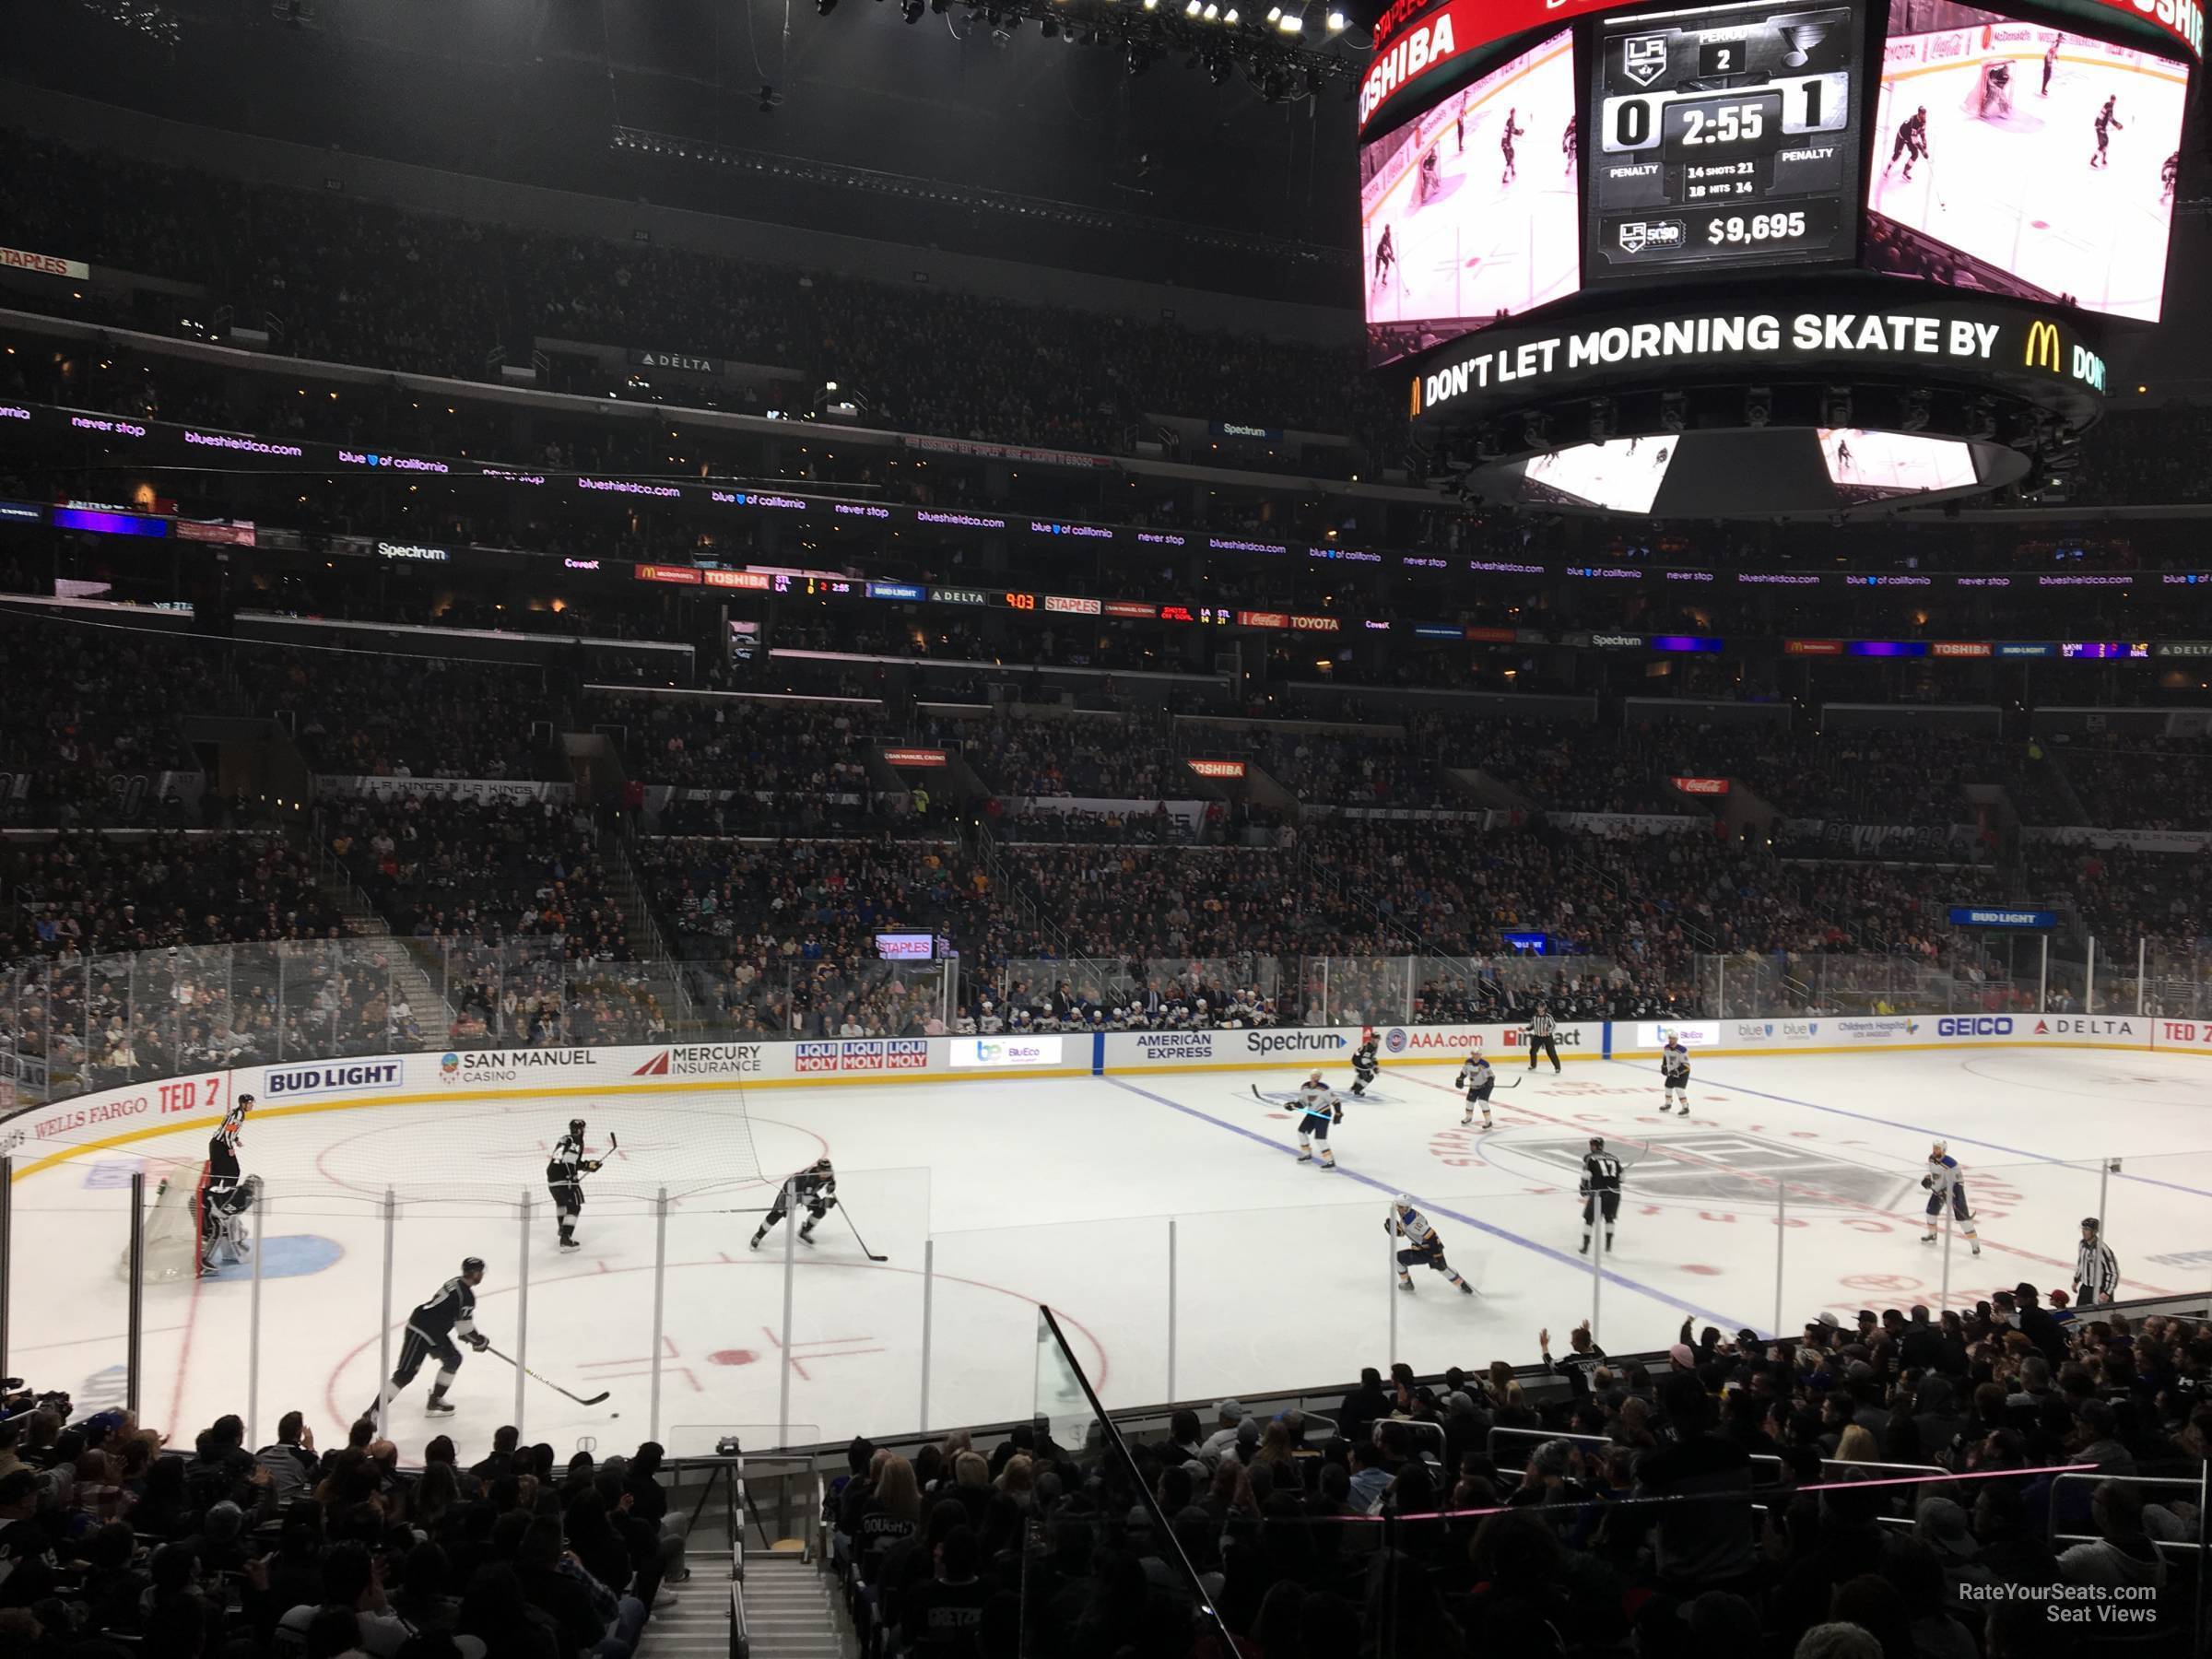 section 113, row 20 seat view  for hockey - crypto.com arena